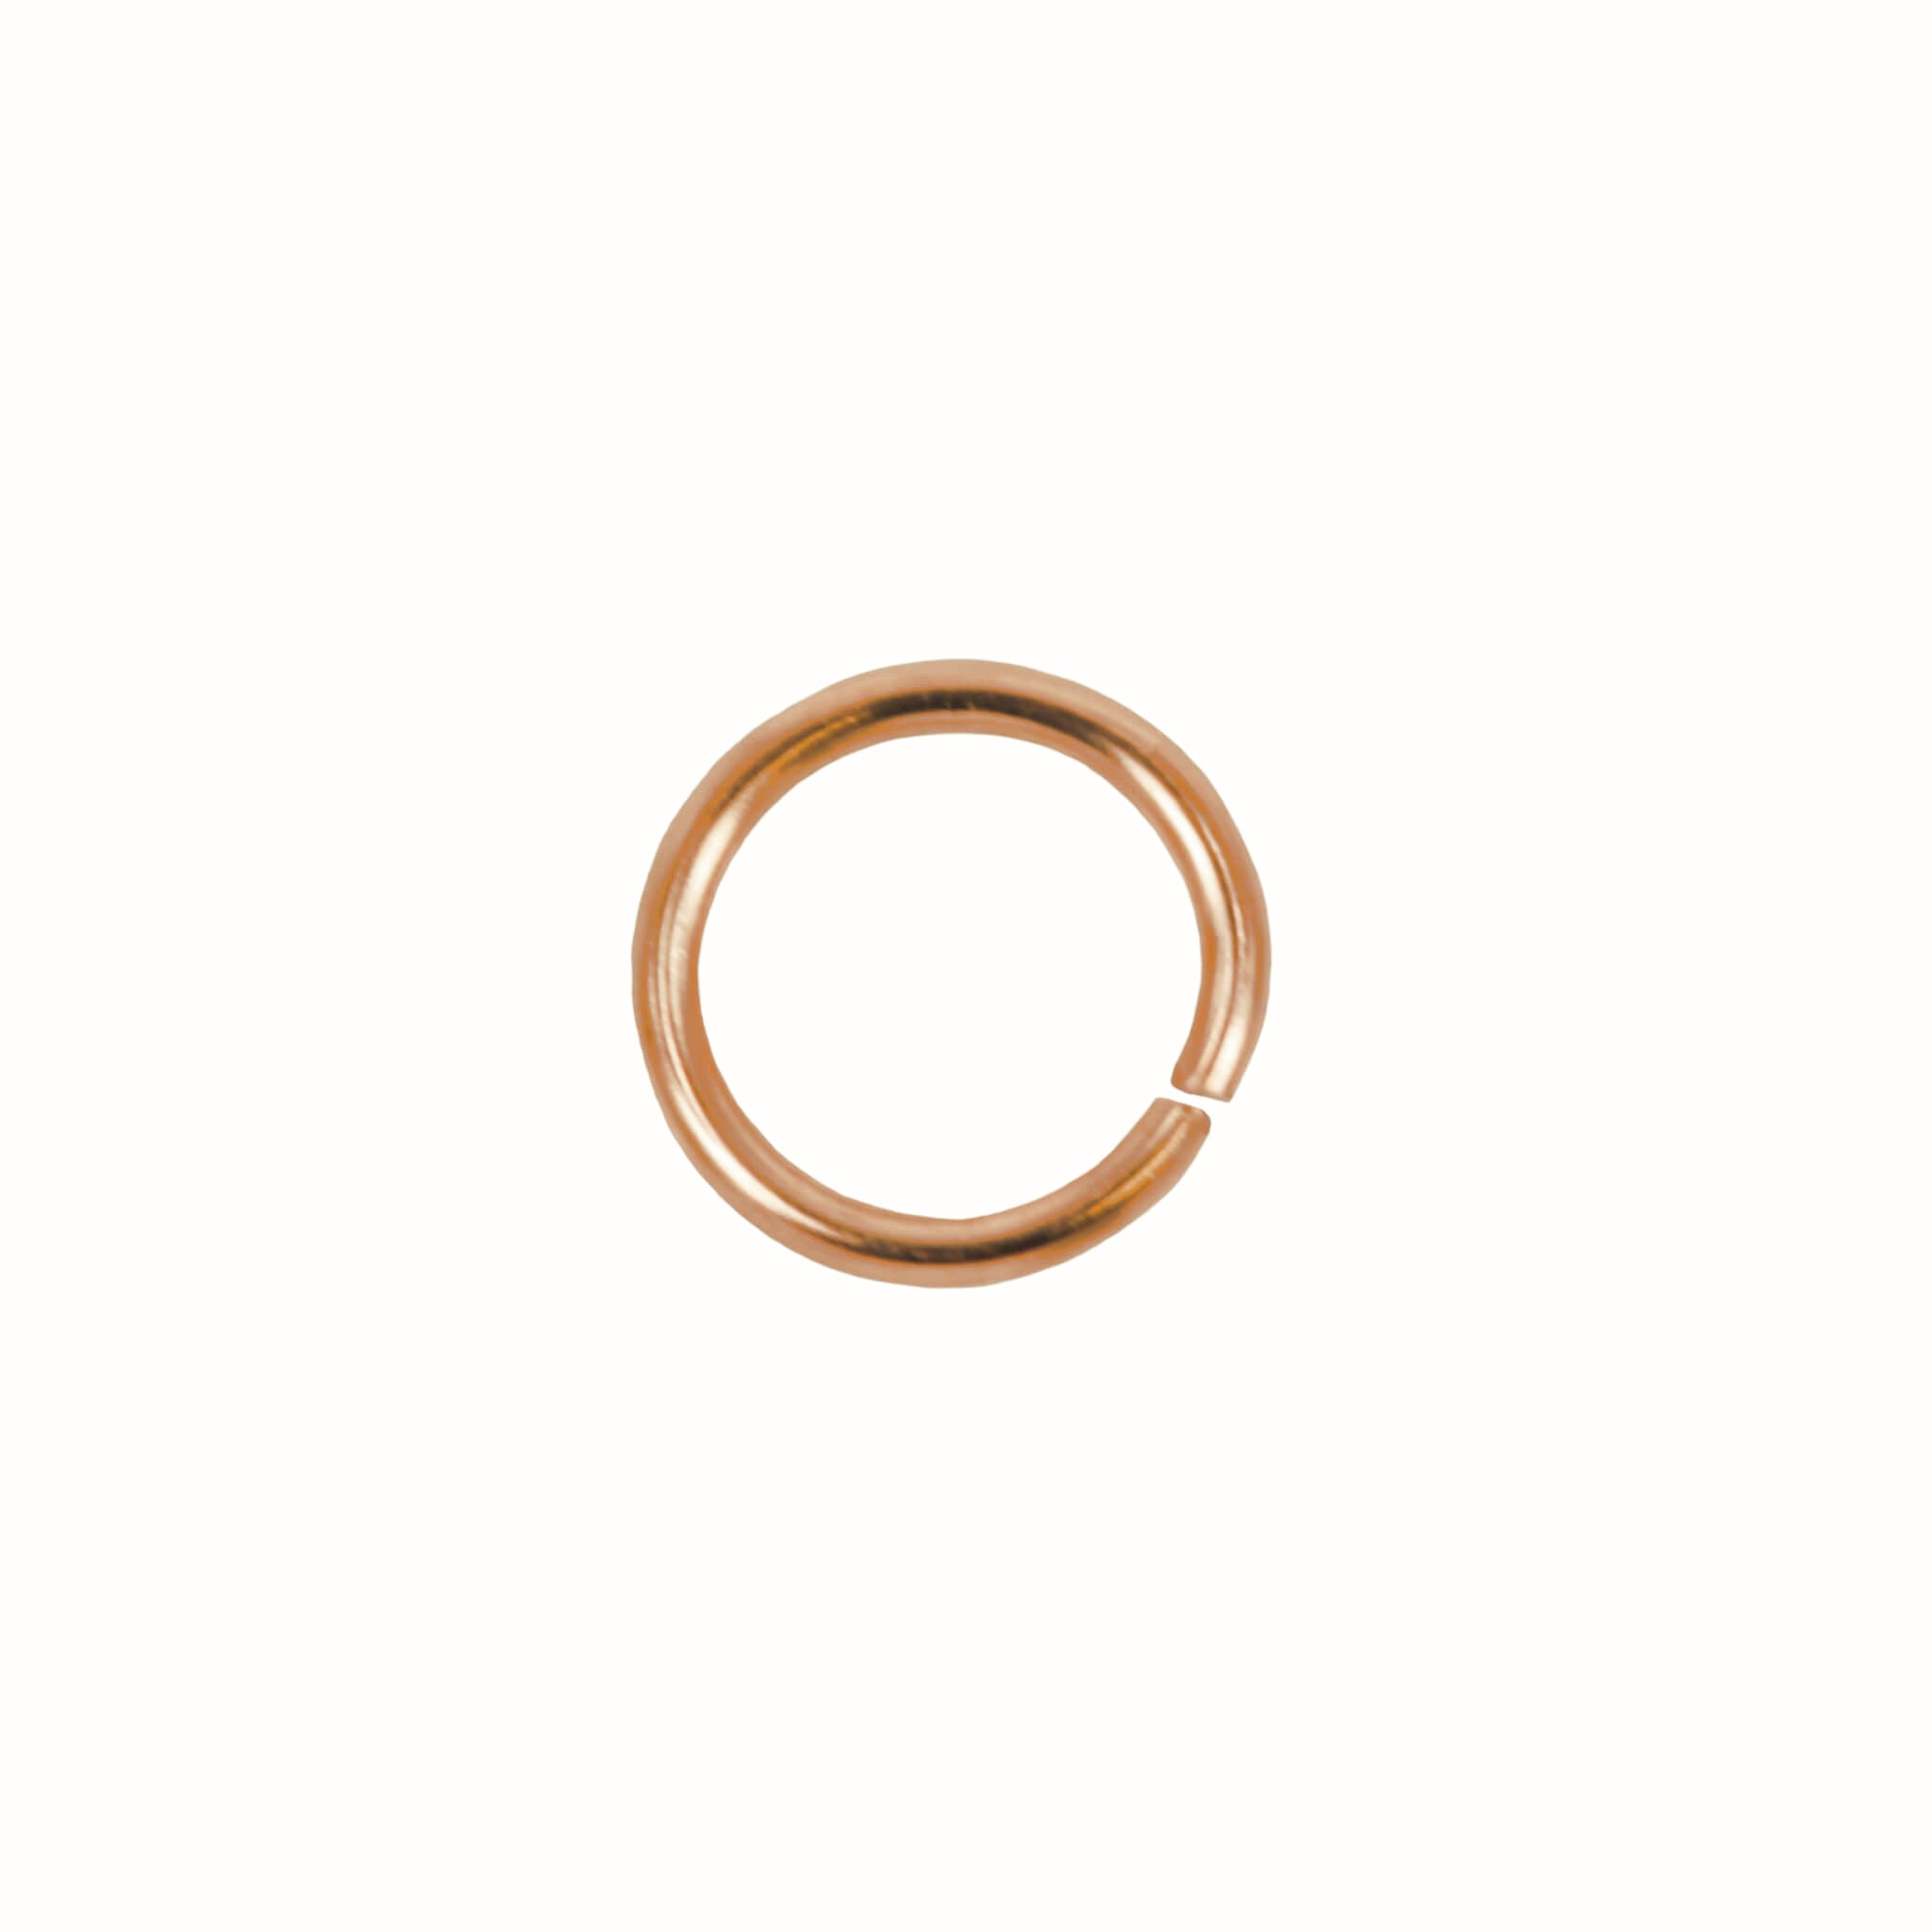 18K Gold Jump Rings (open/unsoldered)